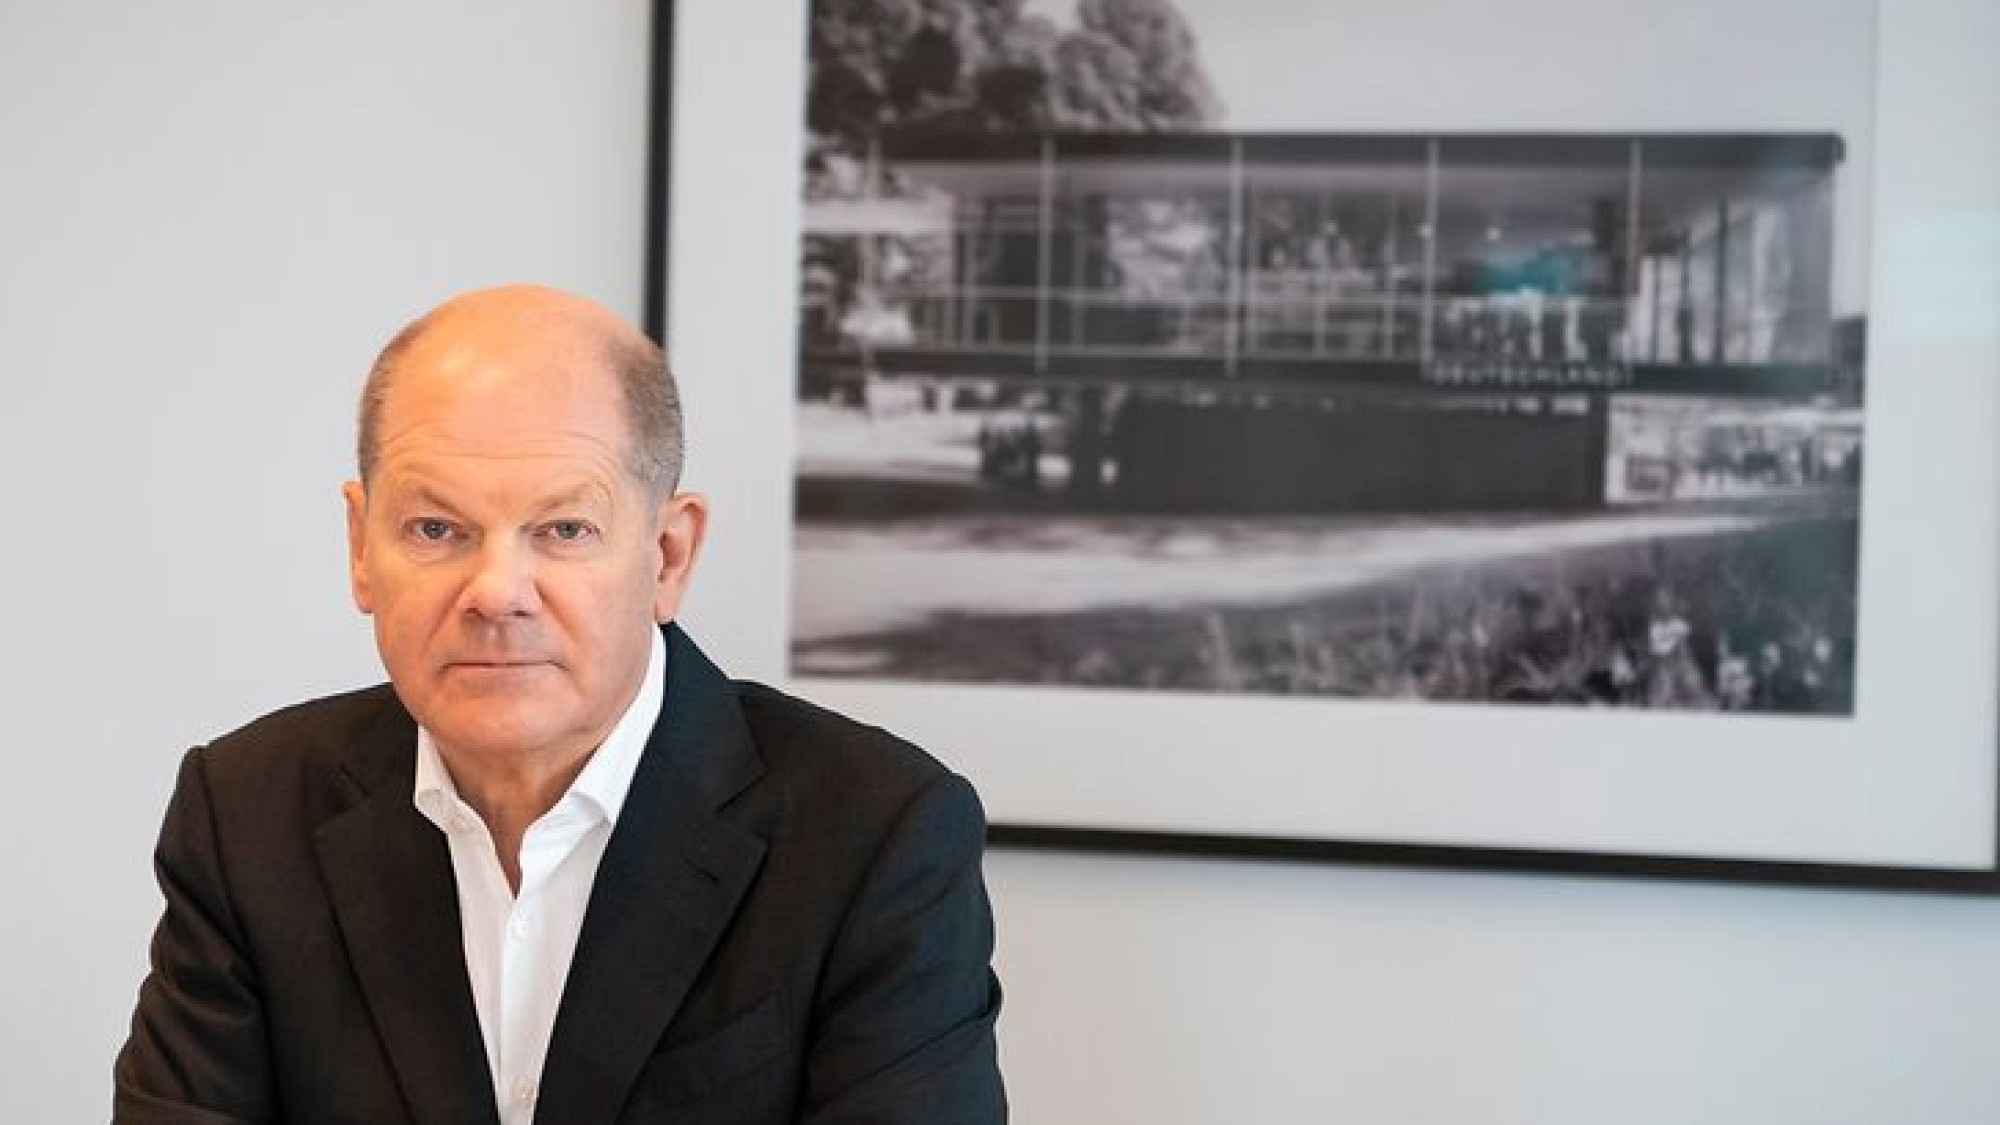 Bauwelt interview with German Chancellor Olaf Scholz